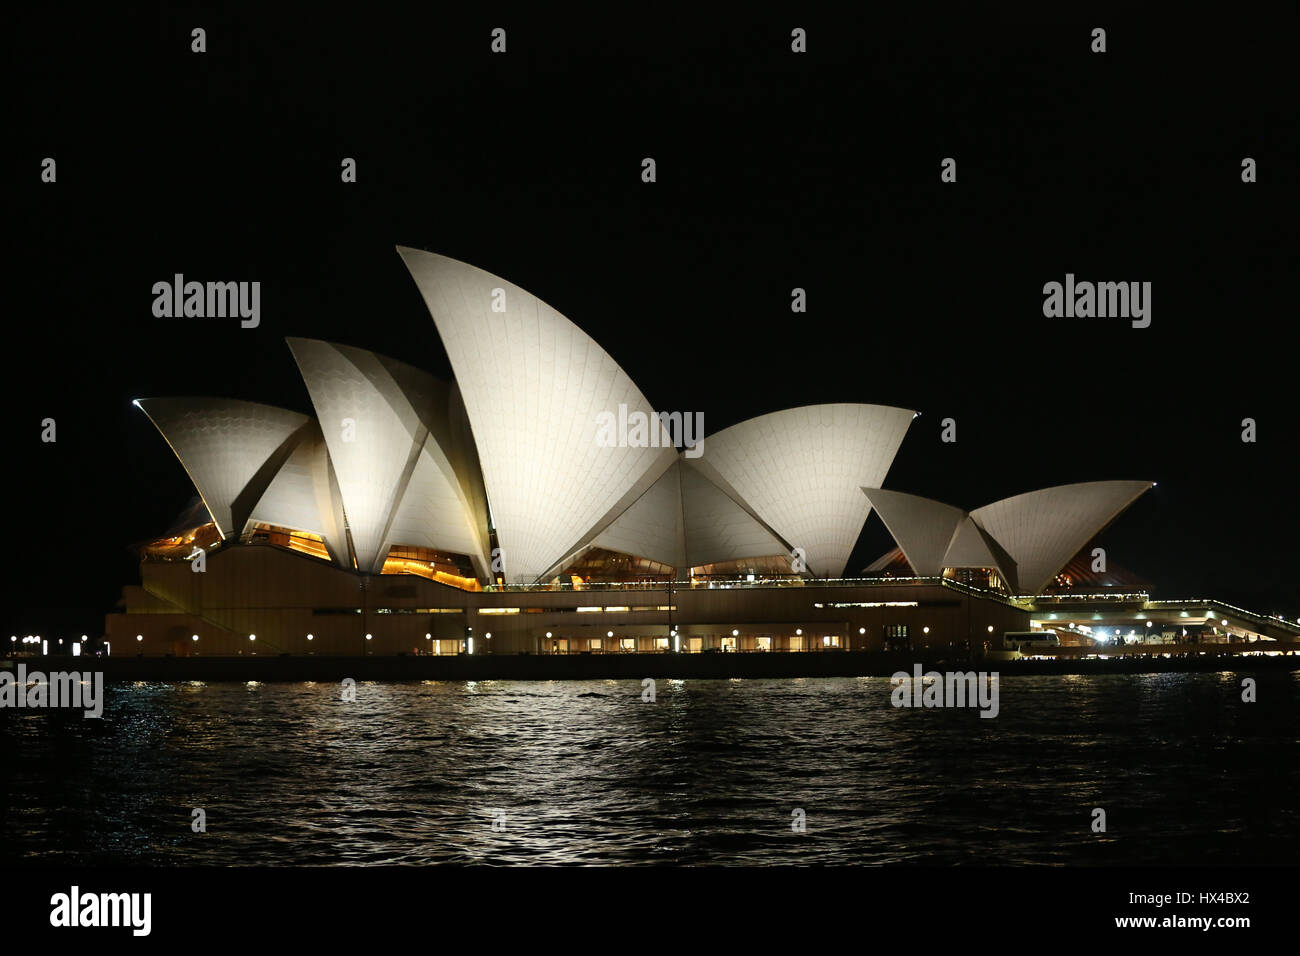 Sydney, Australia. 25 March 2017. The lights of the Sydney Opera House and the Sydney Harbour Bridge were turned off for one hour from 8:30pm to 9:30pm to mark ‘Earth Hour’. Pictured: Sydney Opera House just before Earth Hour. Credit: © Richard Milnes/Alamy Live News Stock Photo